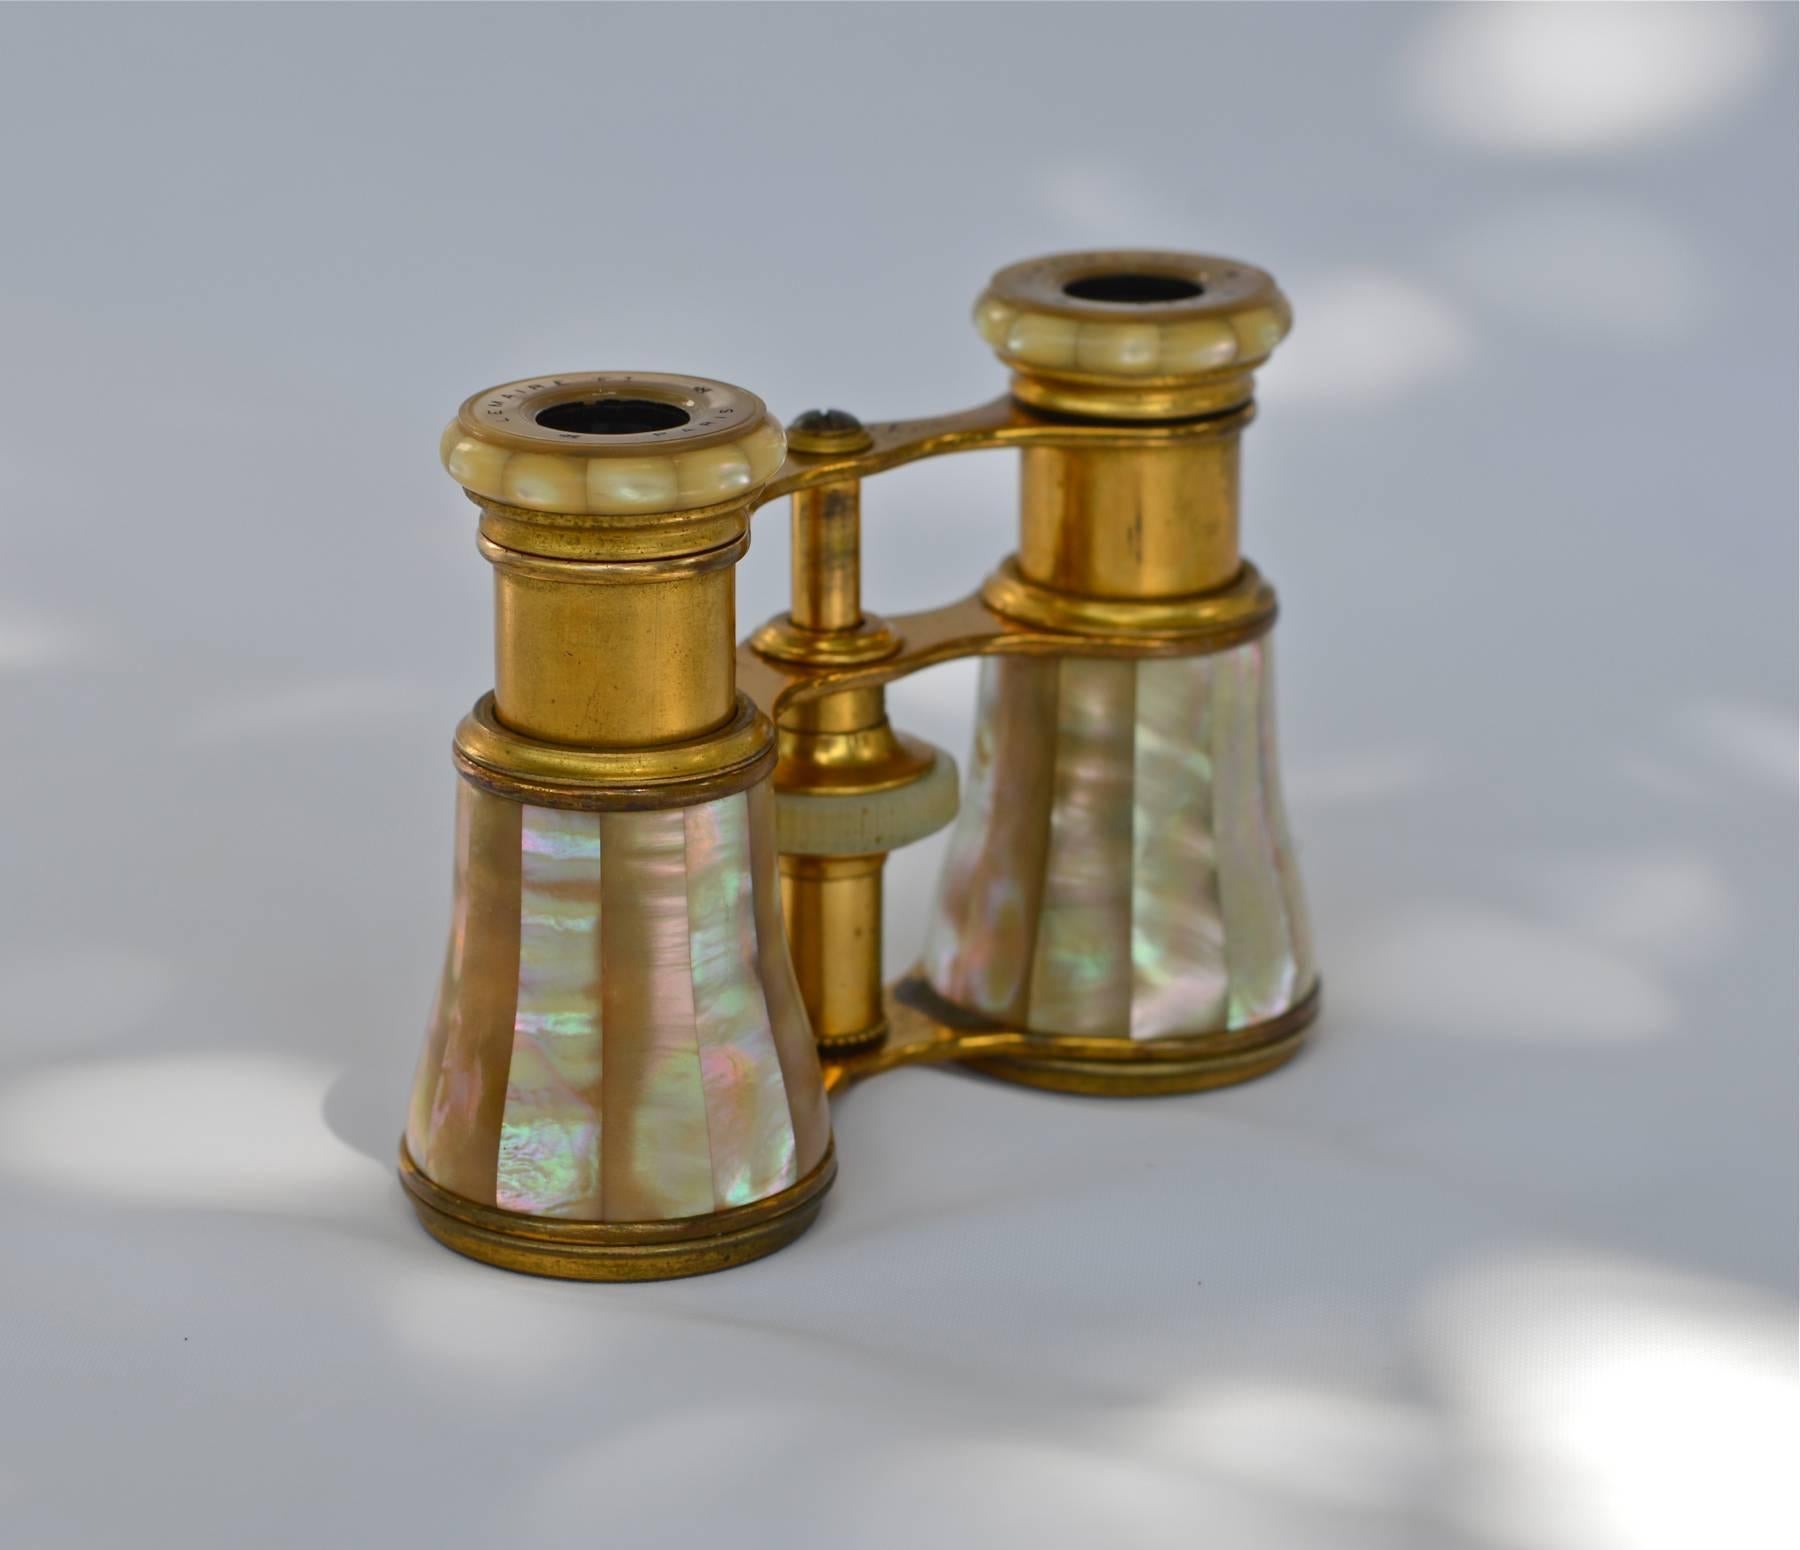 20th Century French Opera Glasses by Lemaire, Paris